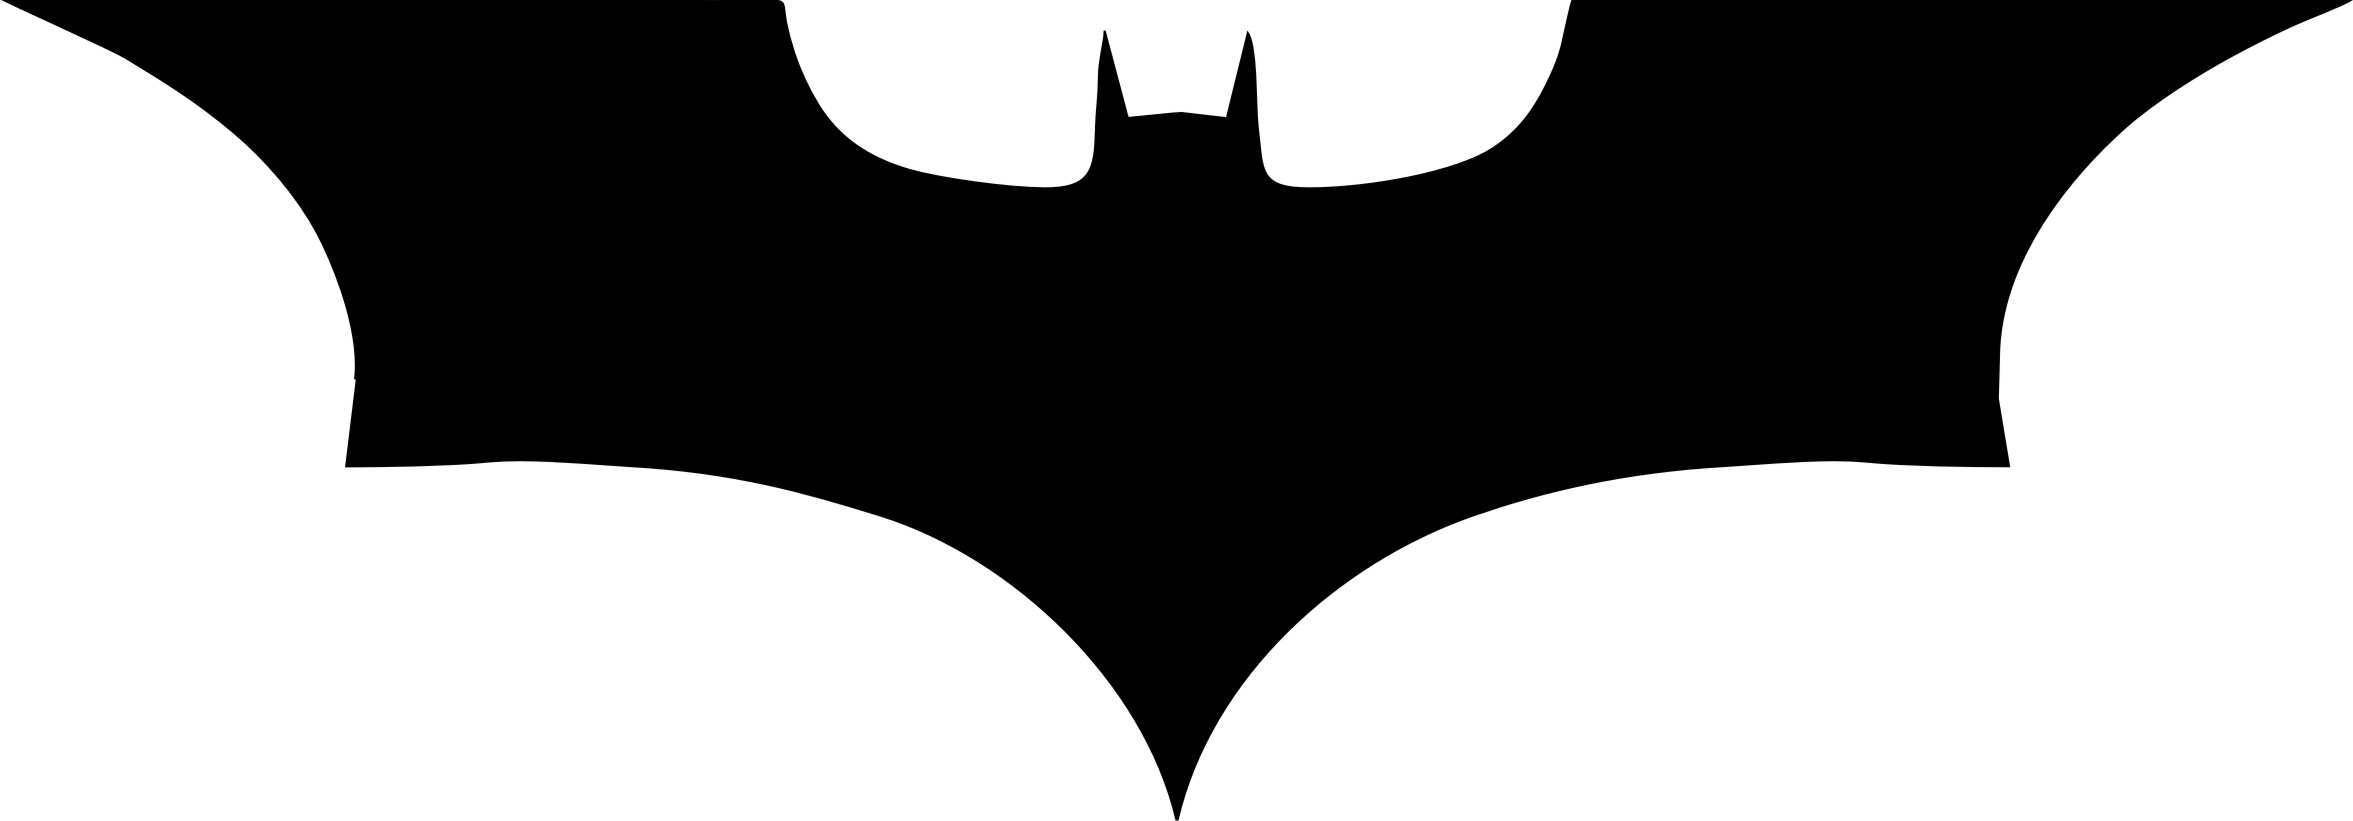 the new batman - Graphic Requests - USCutter Forum